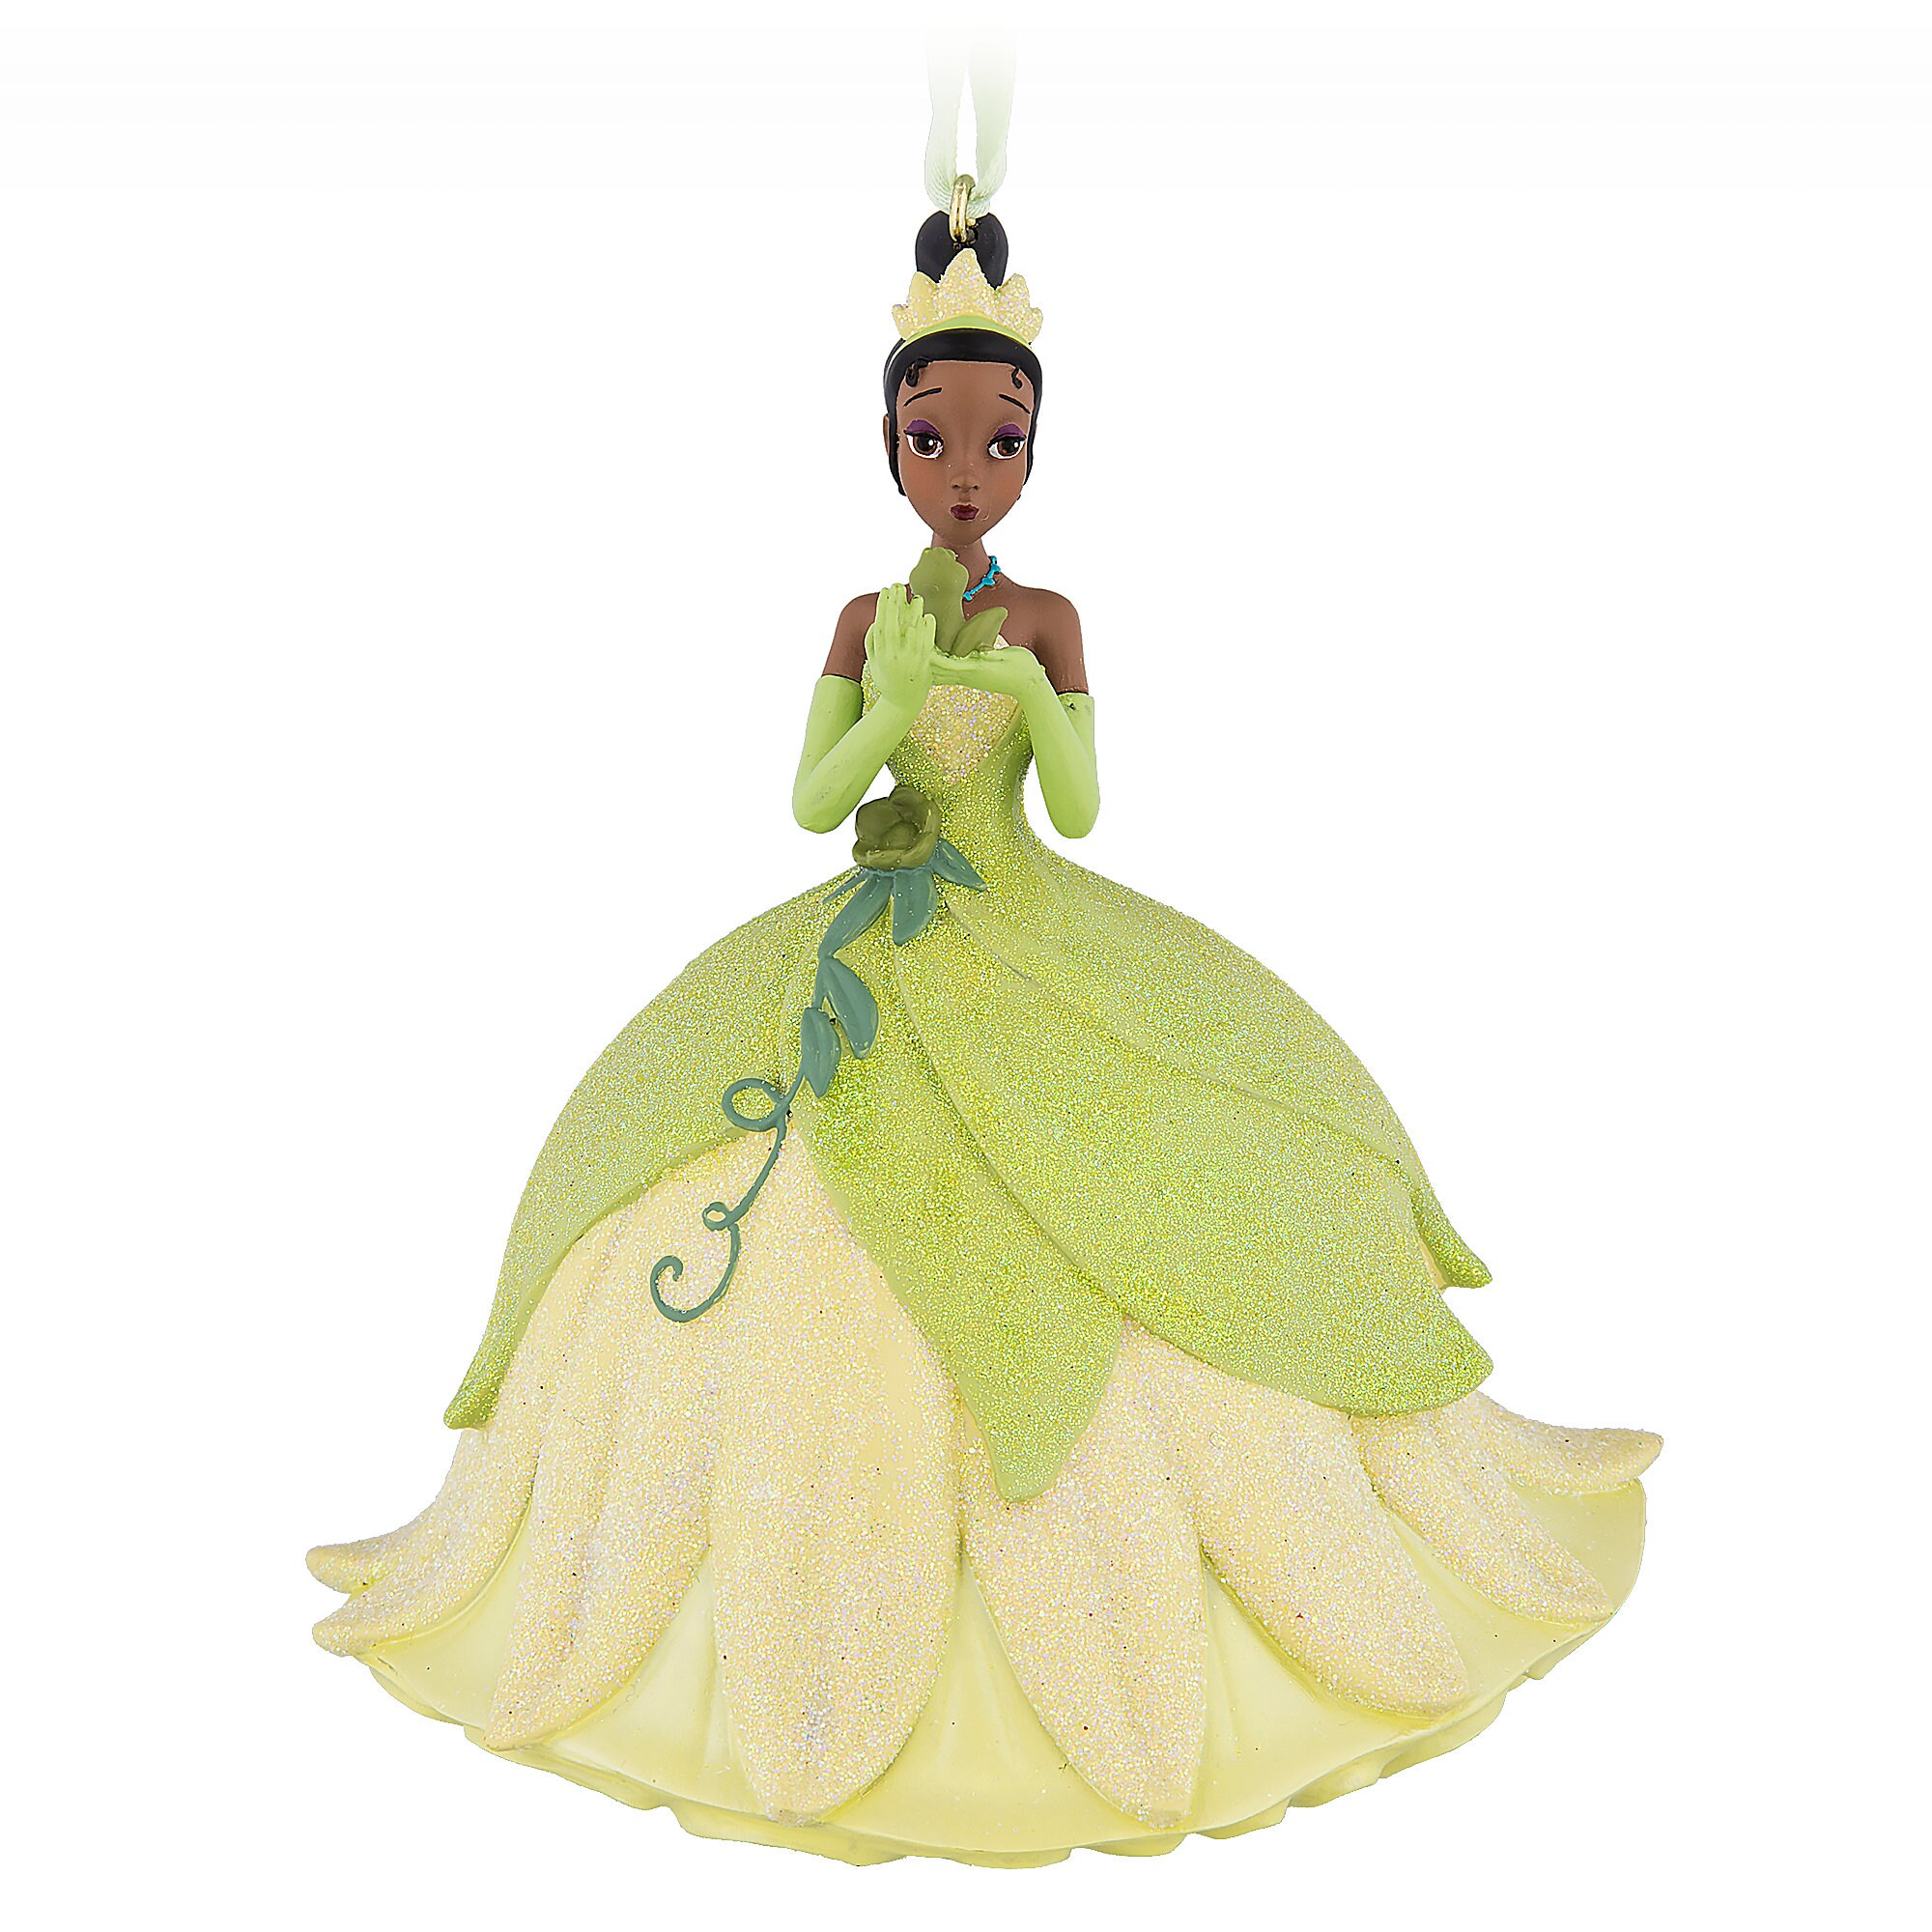 Tiana Figural Ornament - The Princess and the Frog